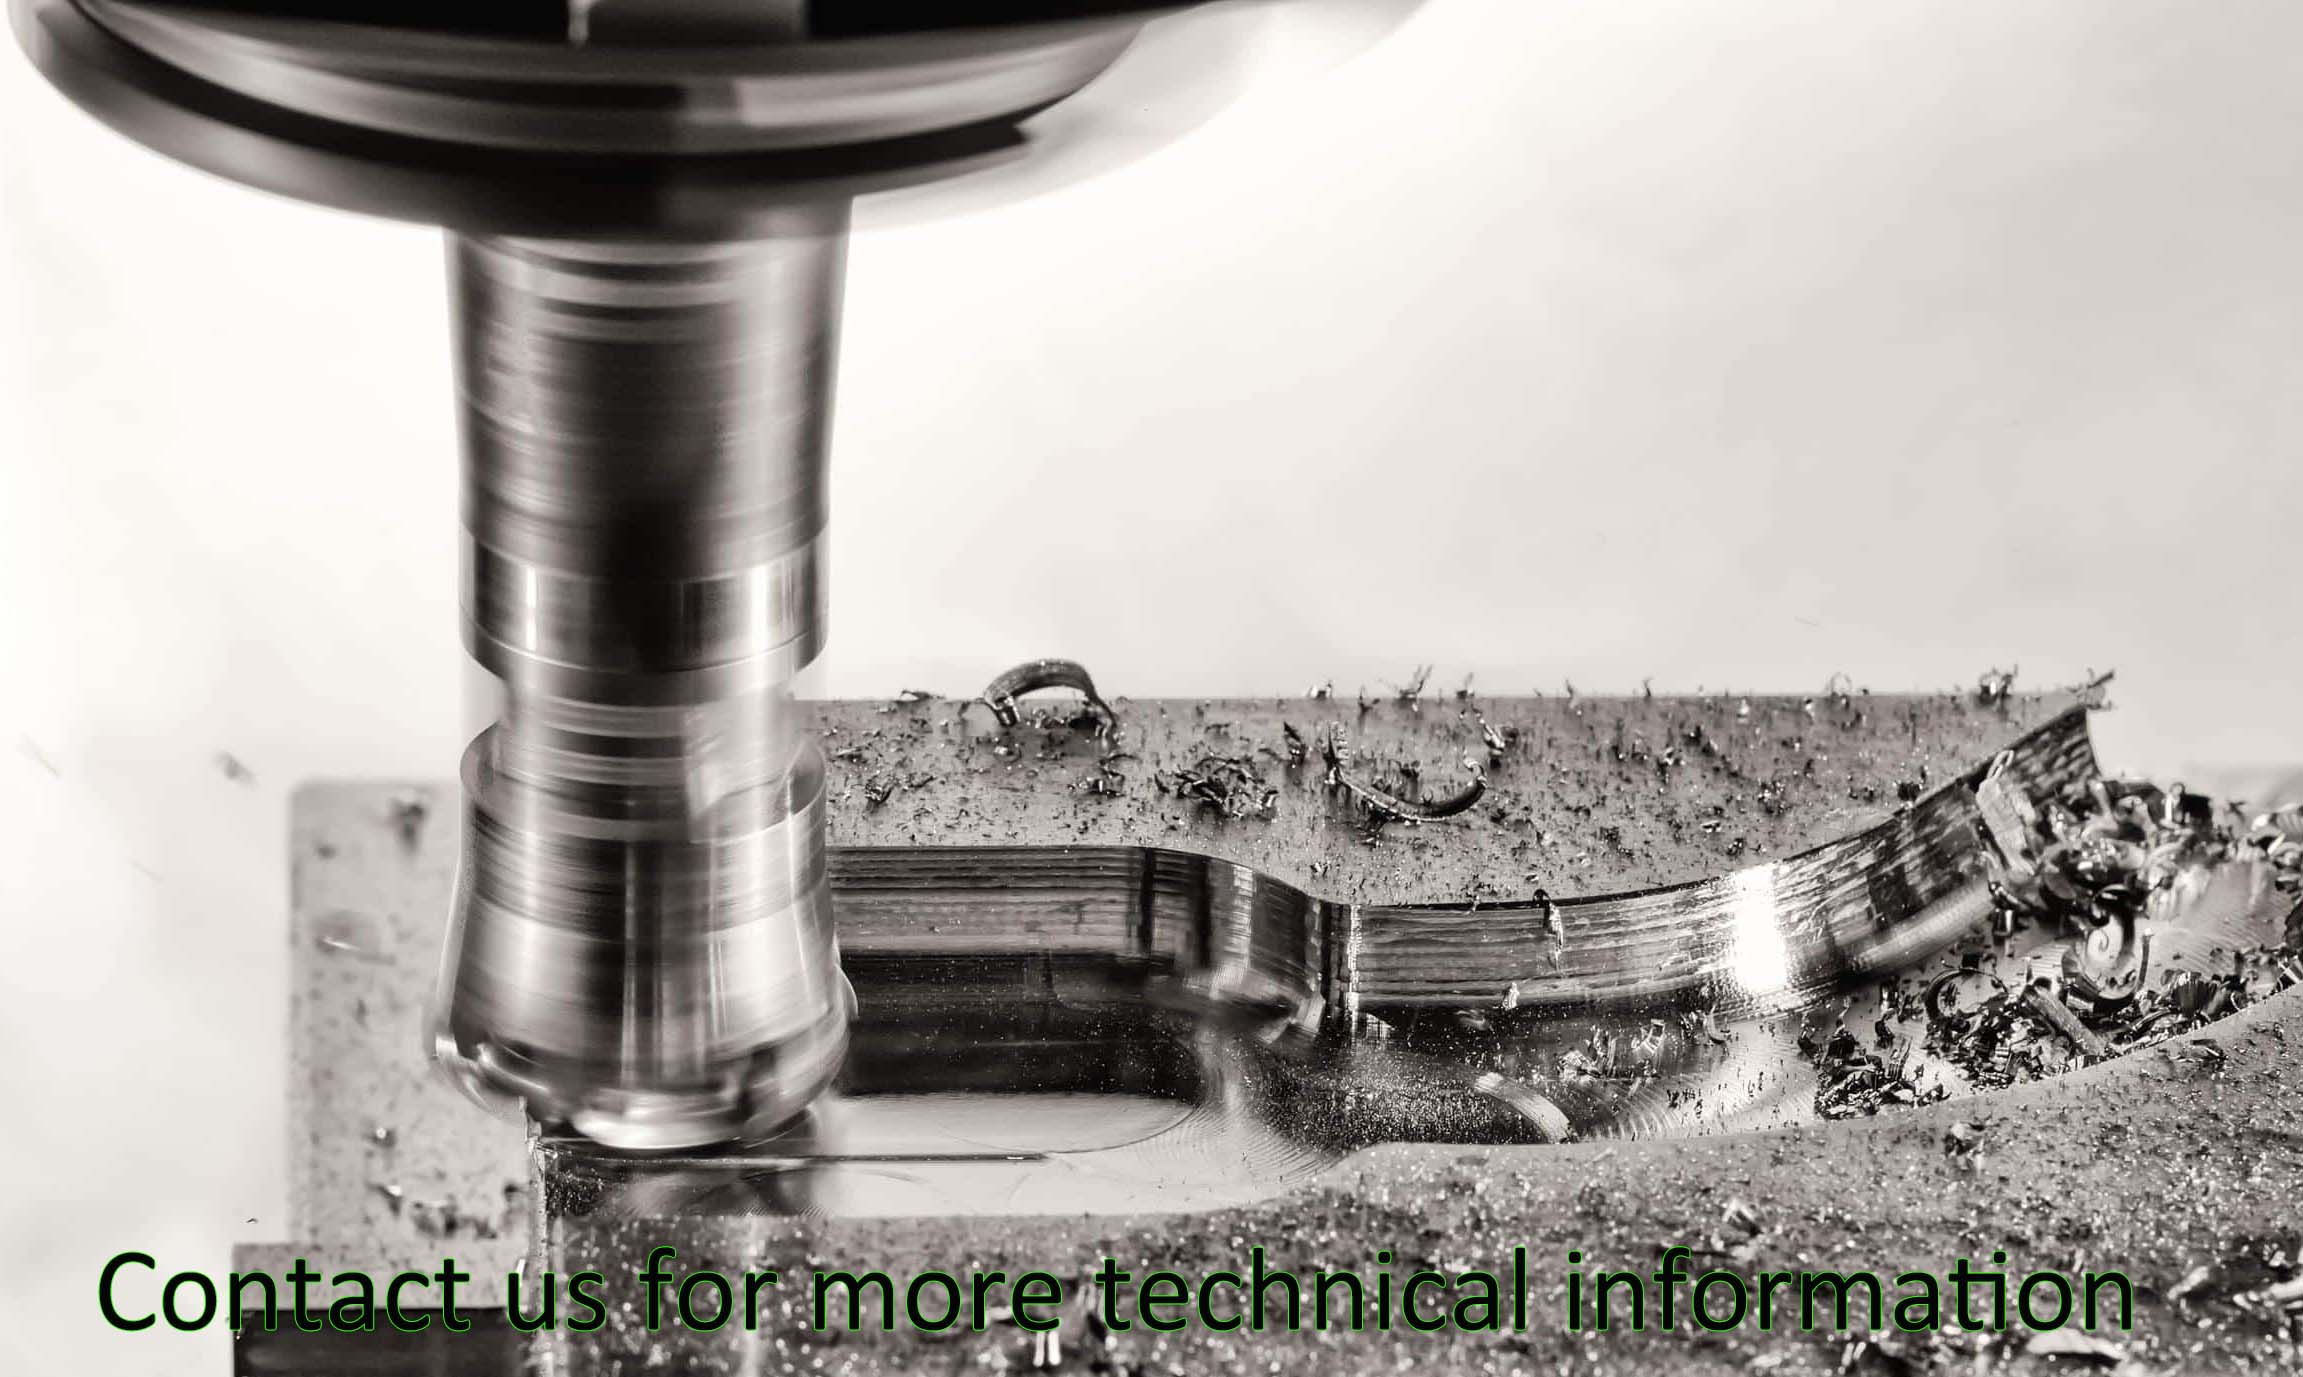 Contact us for more technical information